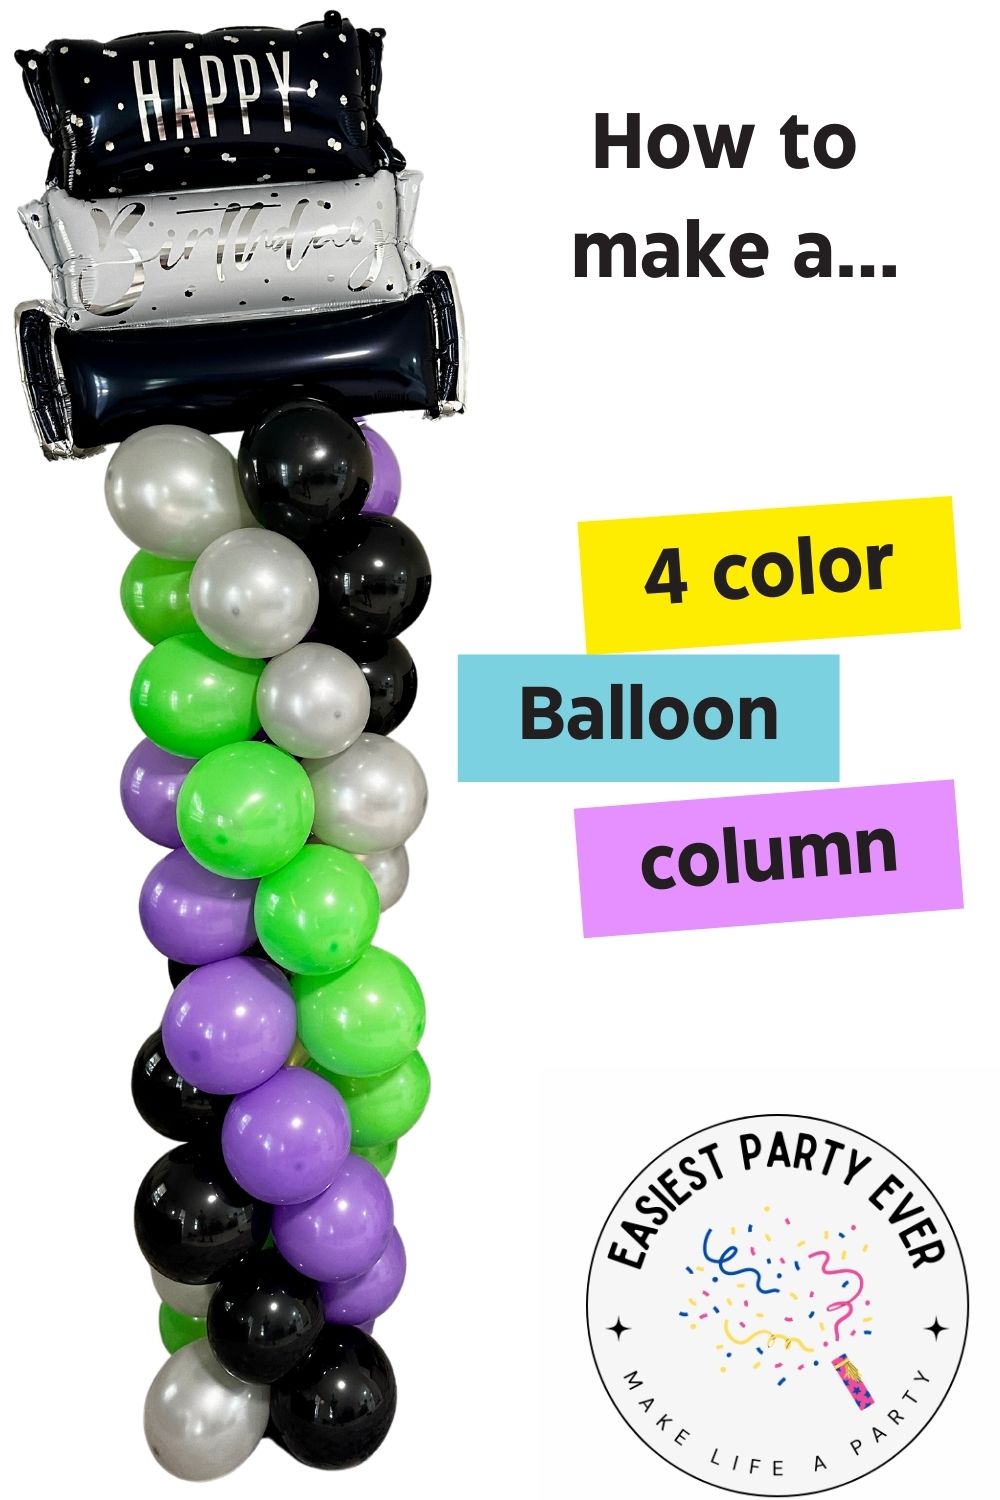 How to make the best 4 color balloon column